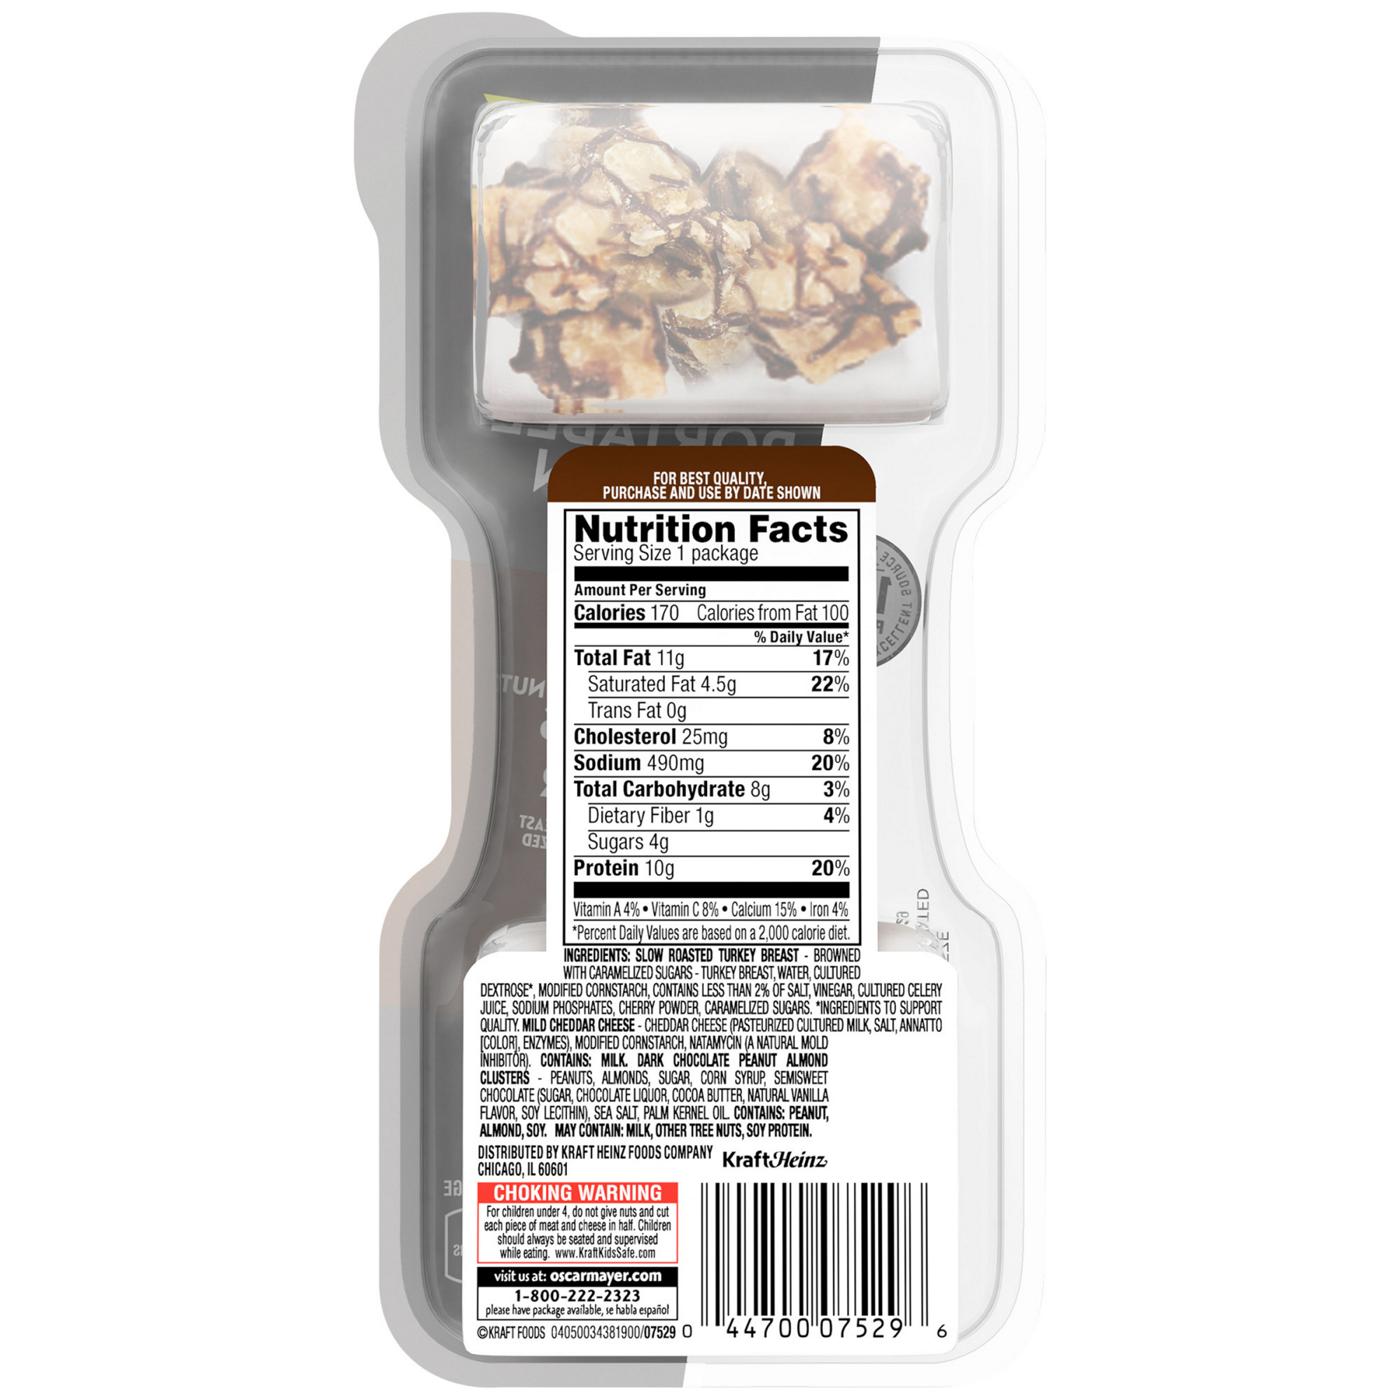 P3 Portable Protein Pack Snack Tray - Dark Chocolate Nut Clusters, Turkey & Cheddar; image 5 of 6